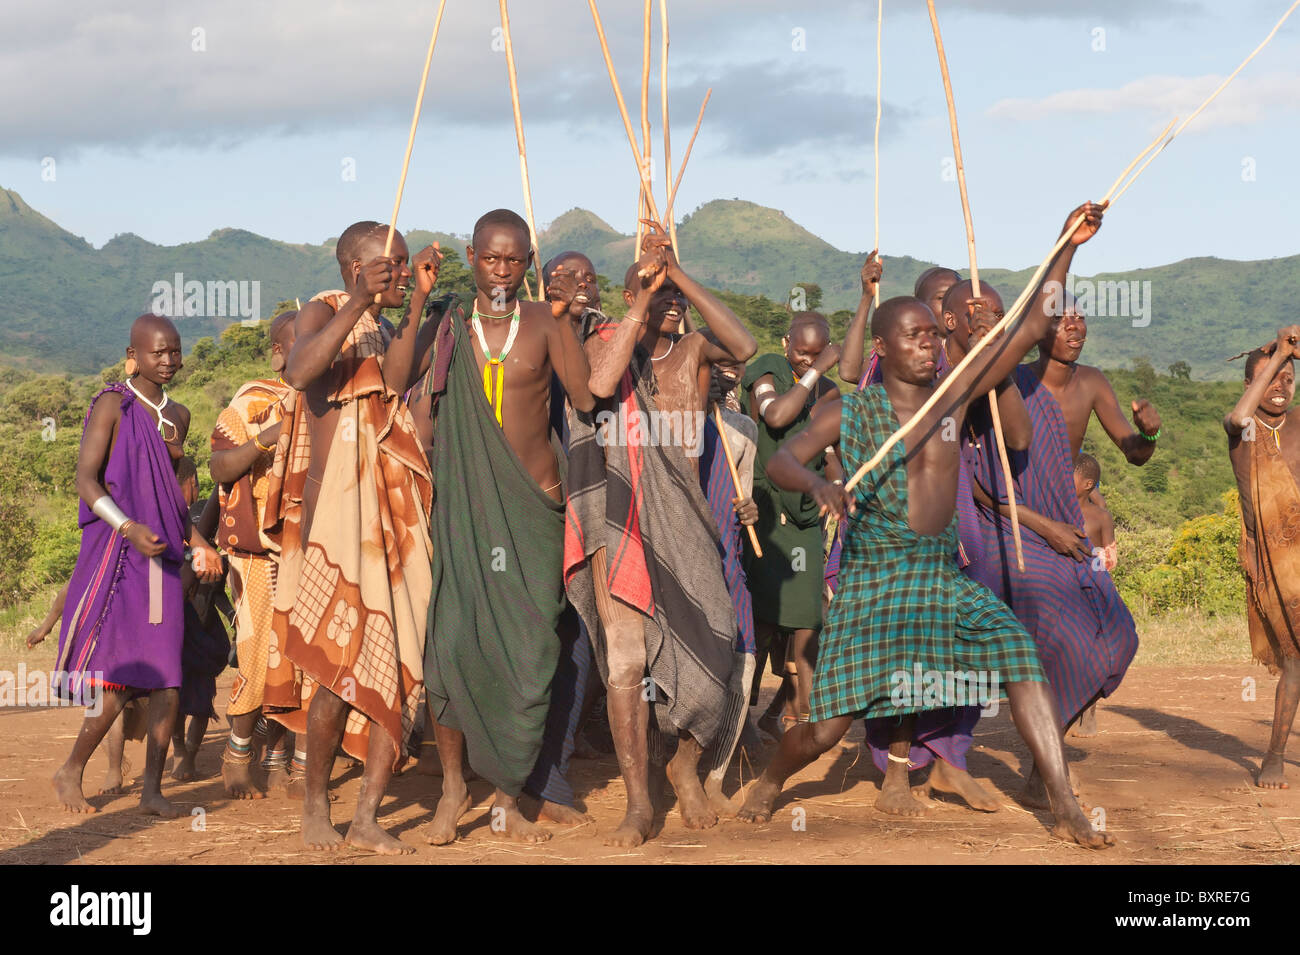 Donga stick fighting in Surma tribe - Ethiopia, One of the …